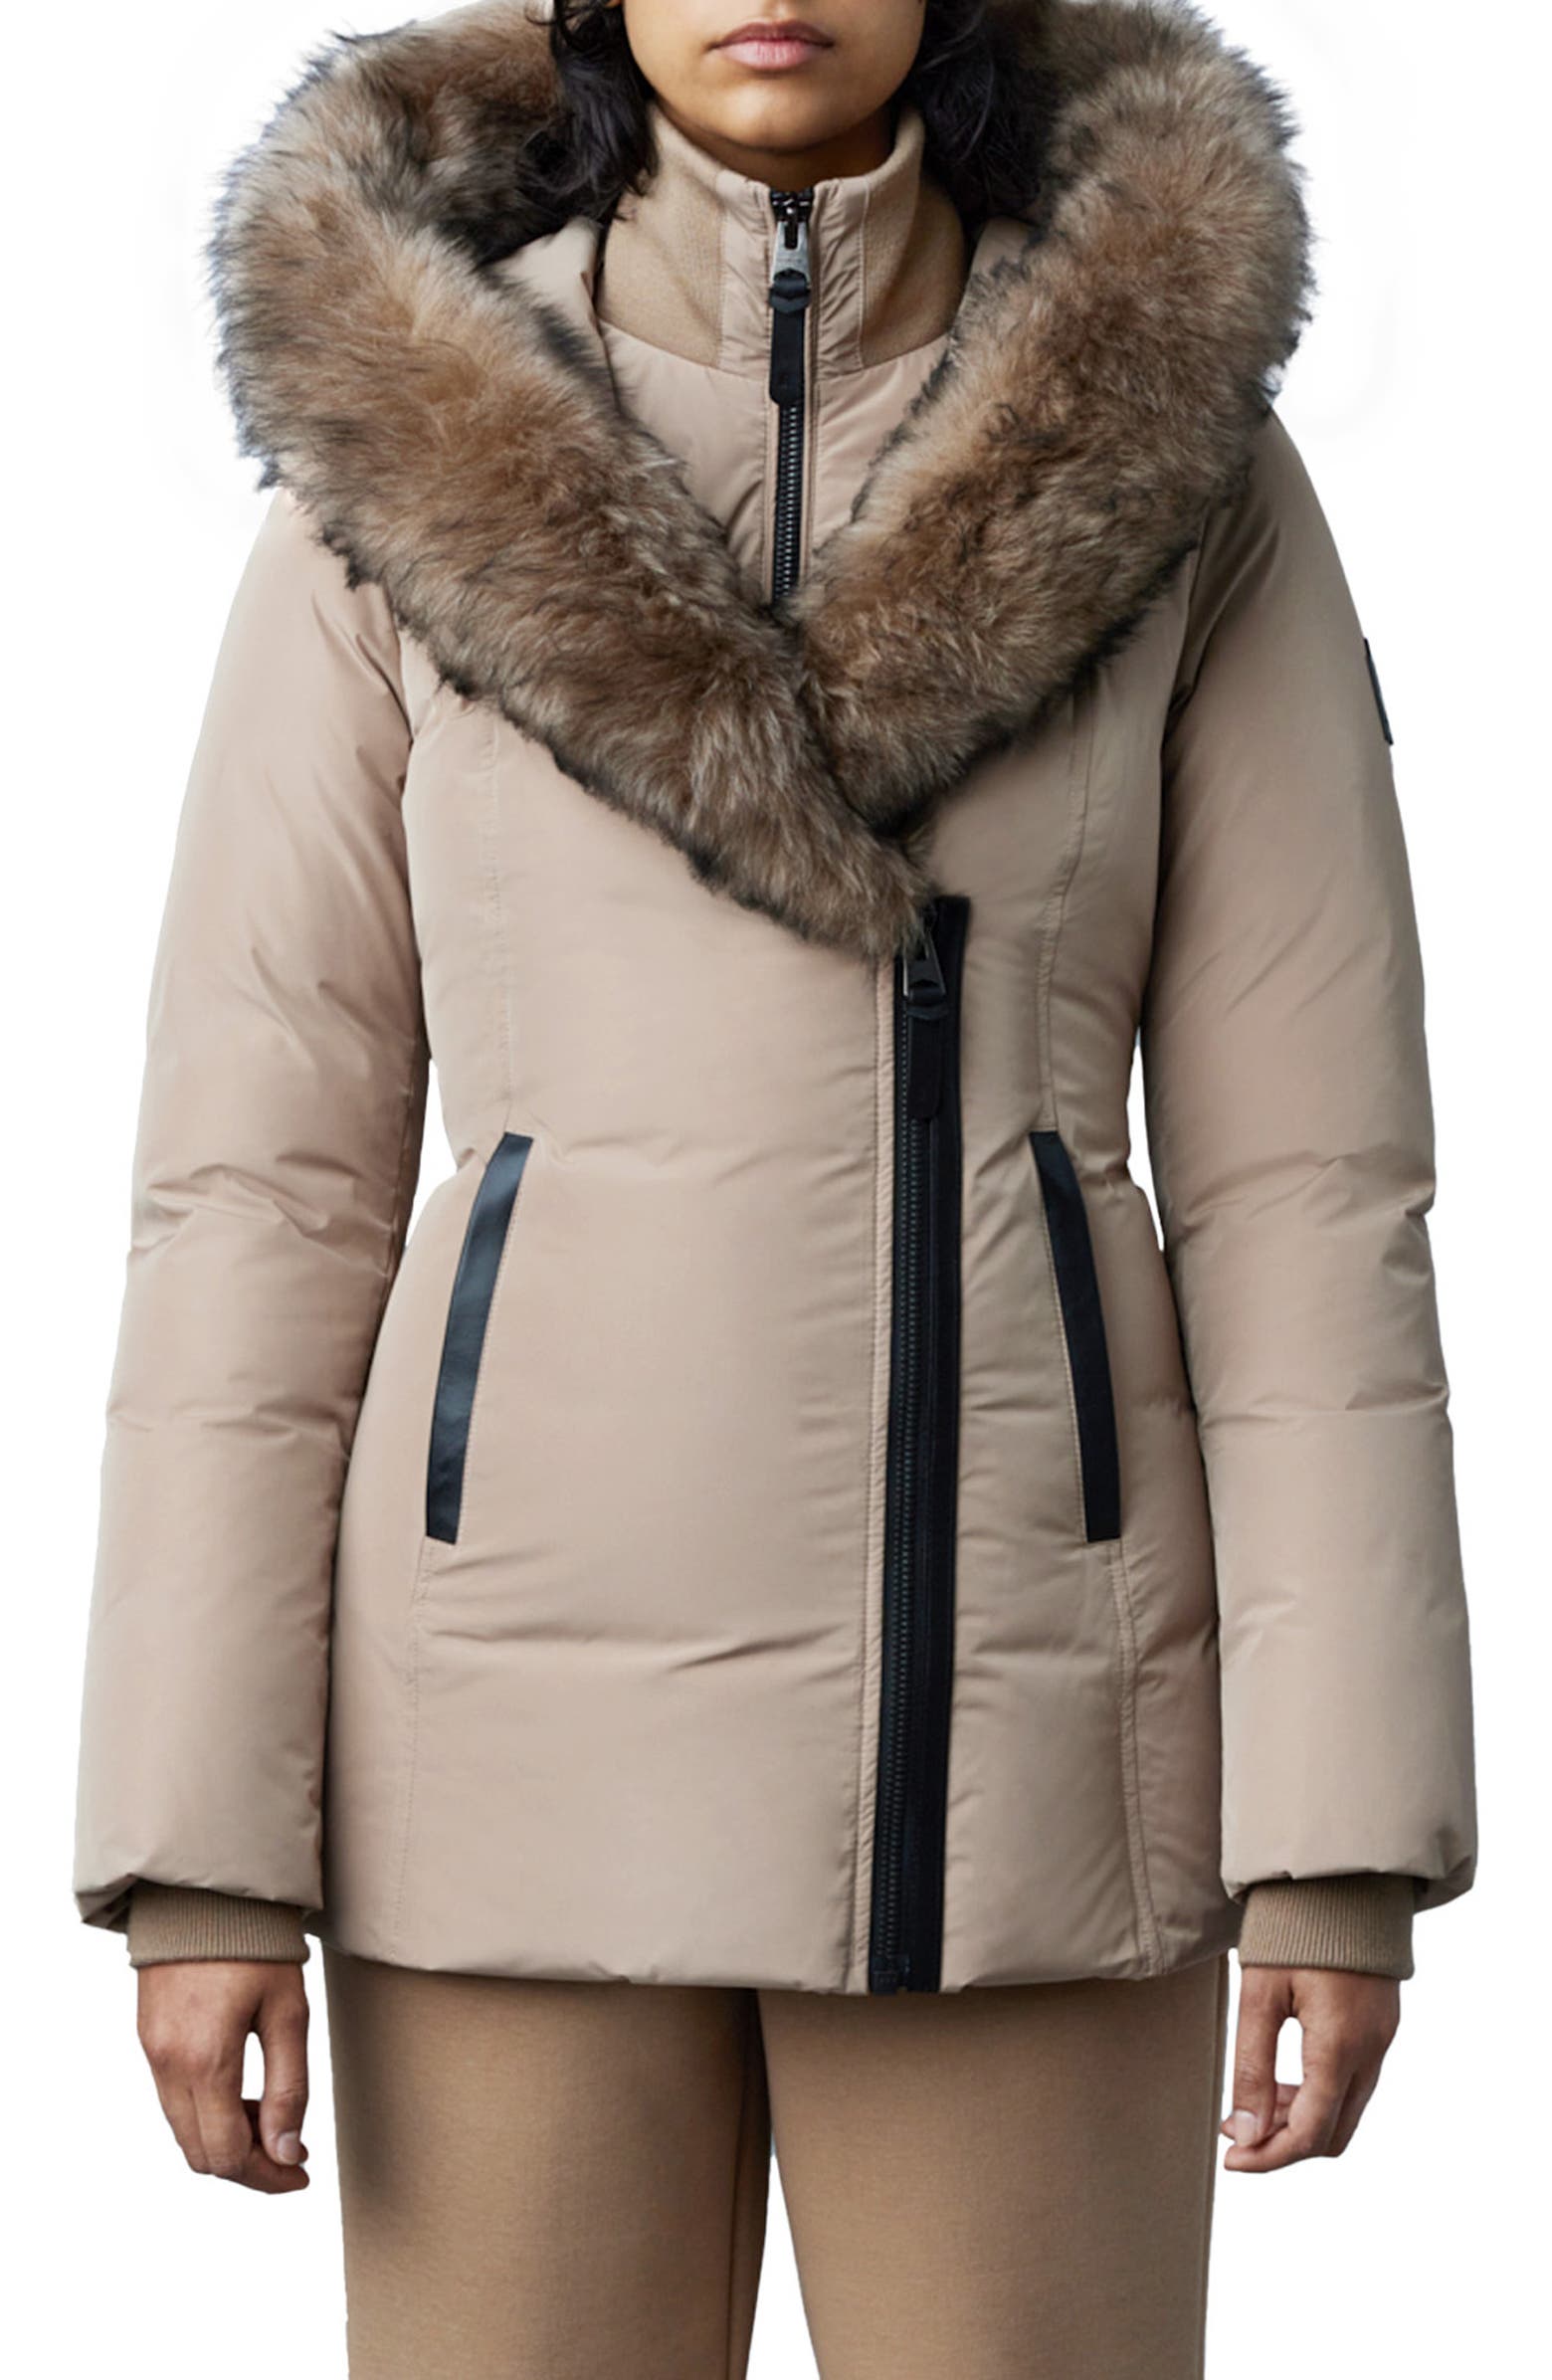 Taupe Mackage puffer jacket for winter